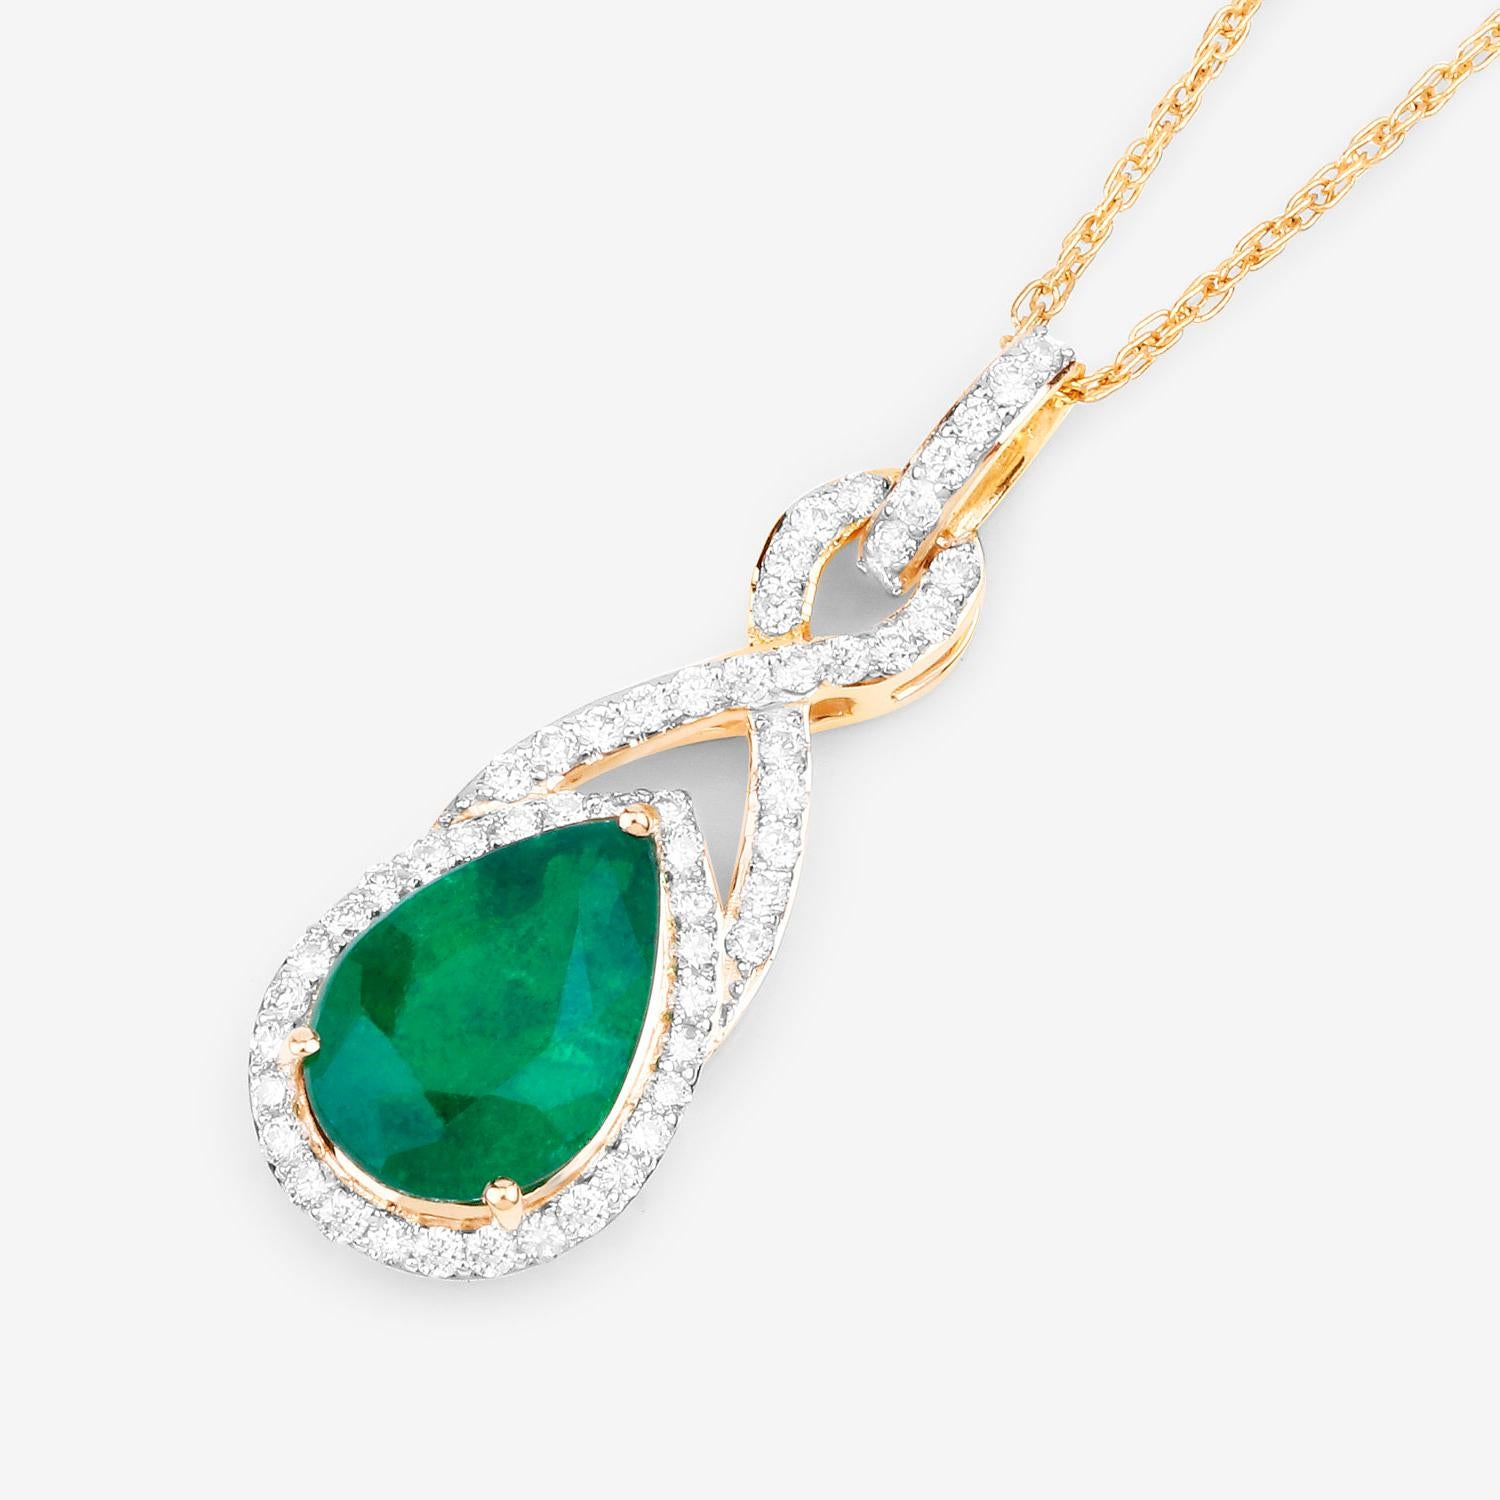 Old European Cut IGI Certified Zambian Emerald Pendant Necklace With Diamonds 1.75 Carats 14K Yel For Sale